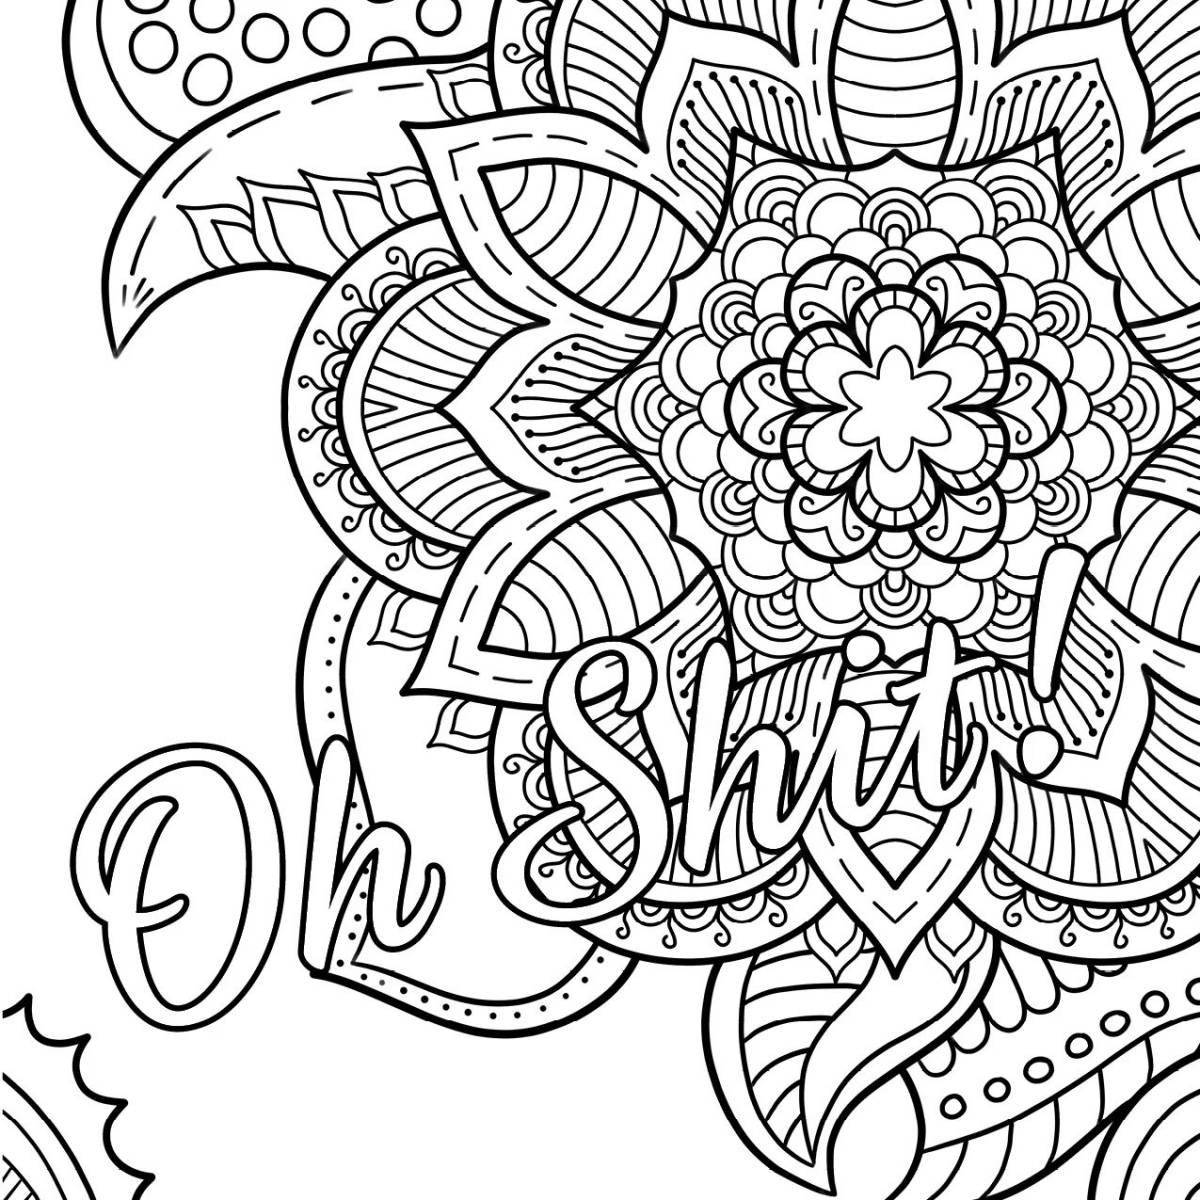 Stylish adult light coloring page